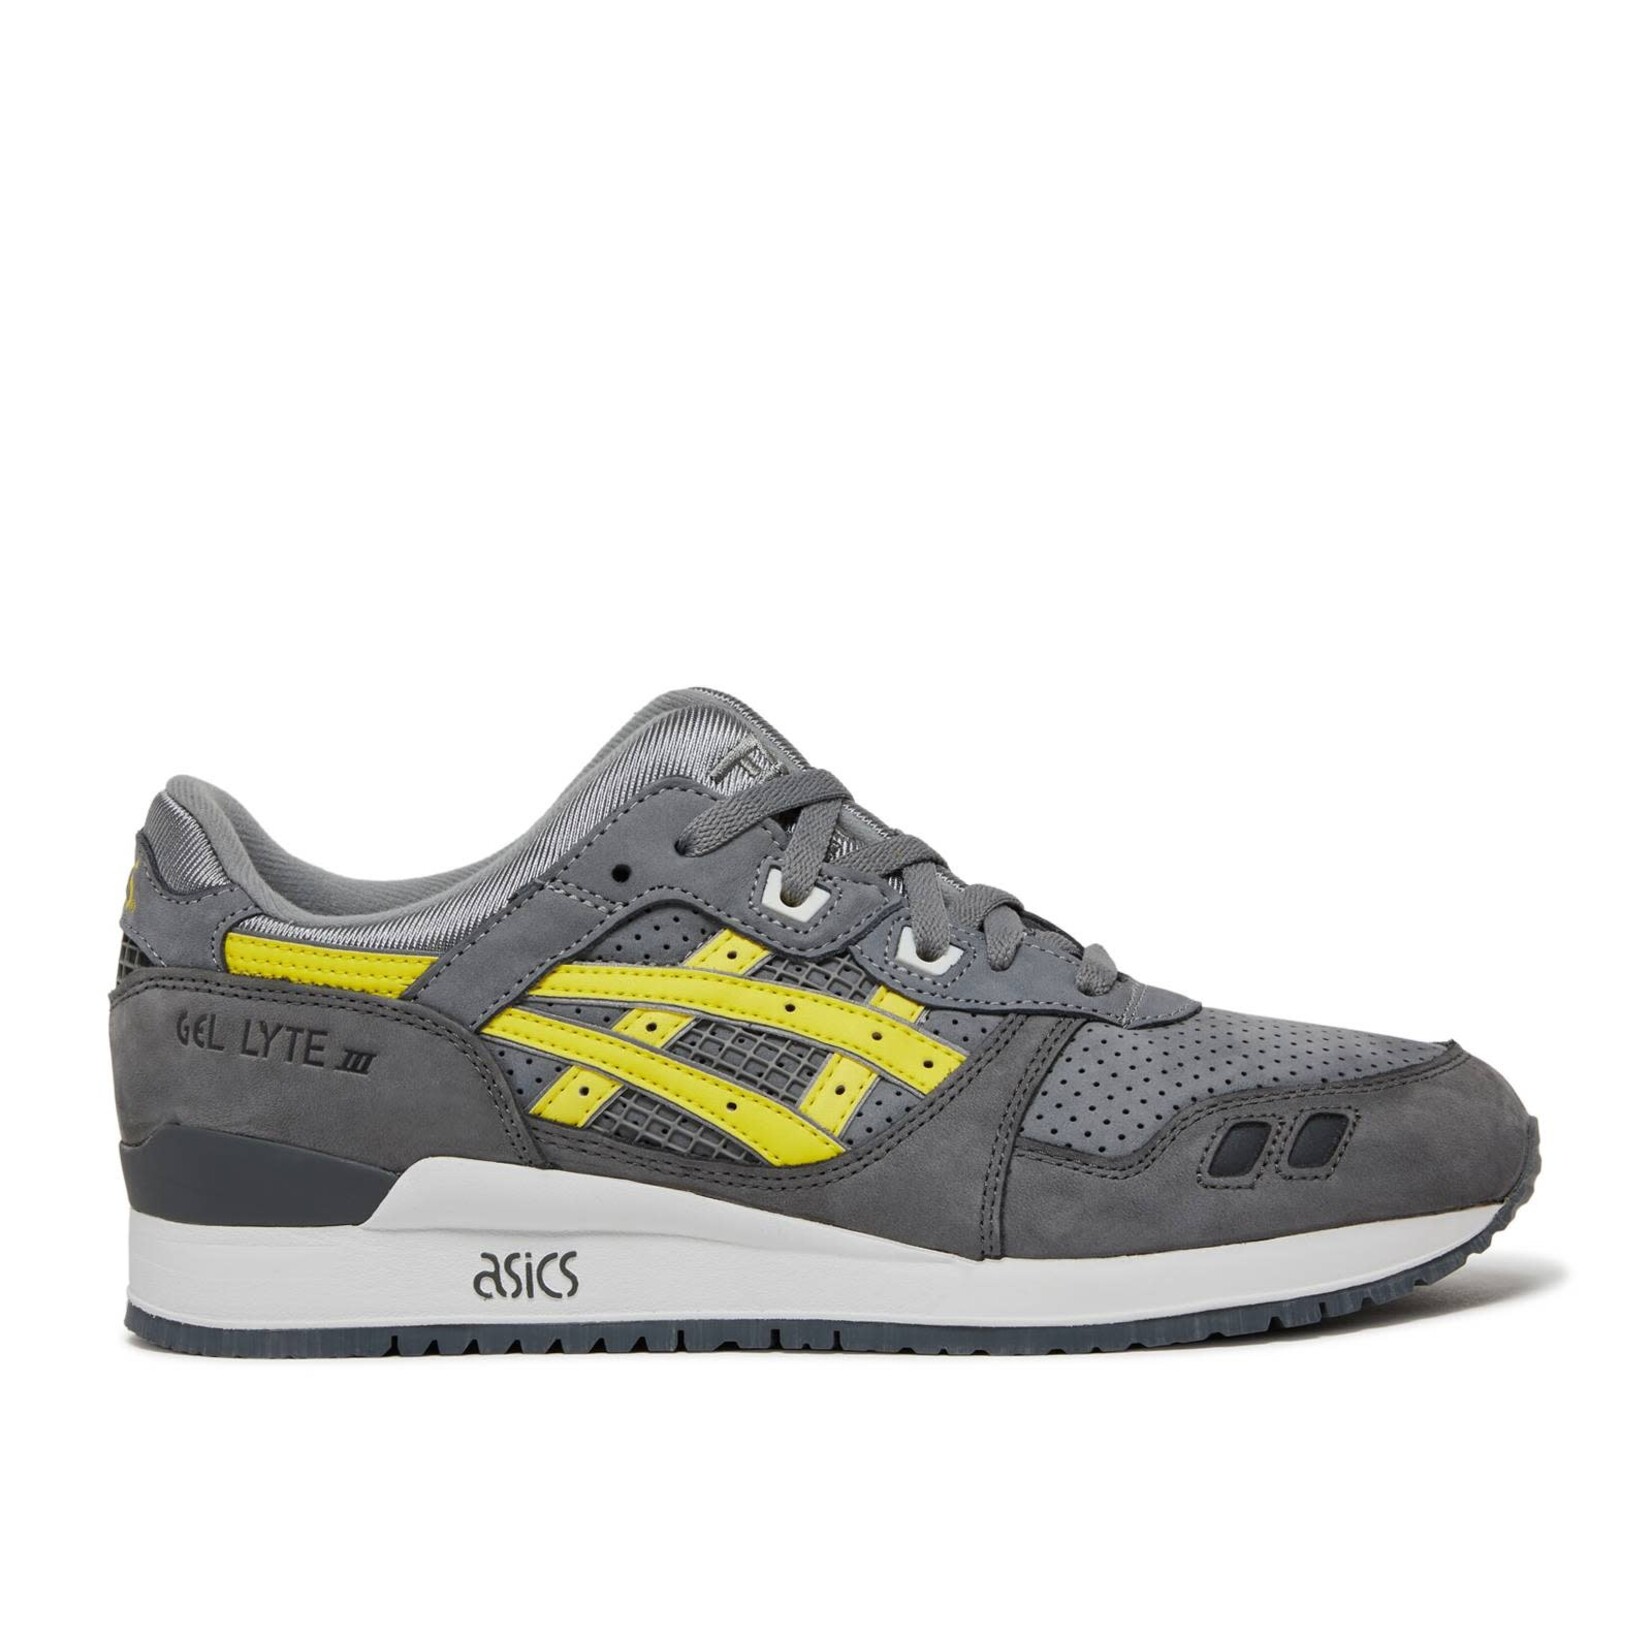 ASICS ASICS Gel-Lyte III Remastered Ronnie Fieg Super Yellow Size 10.5, DS BRAND NEW